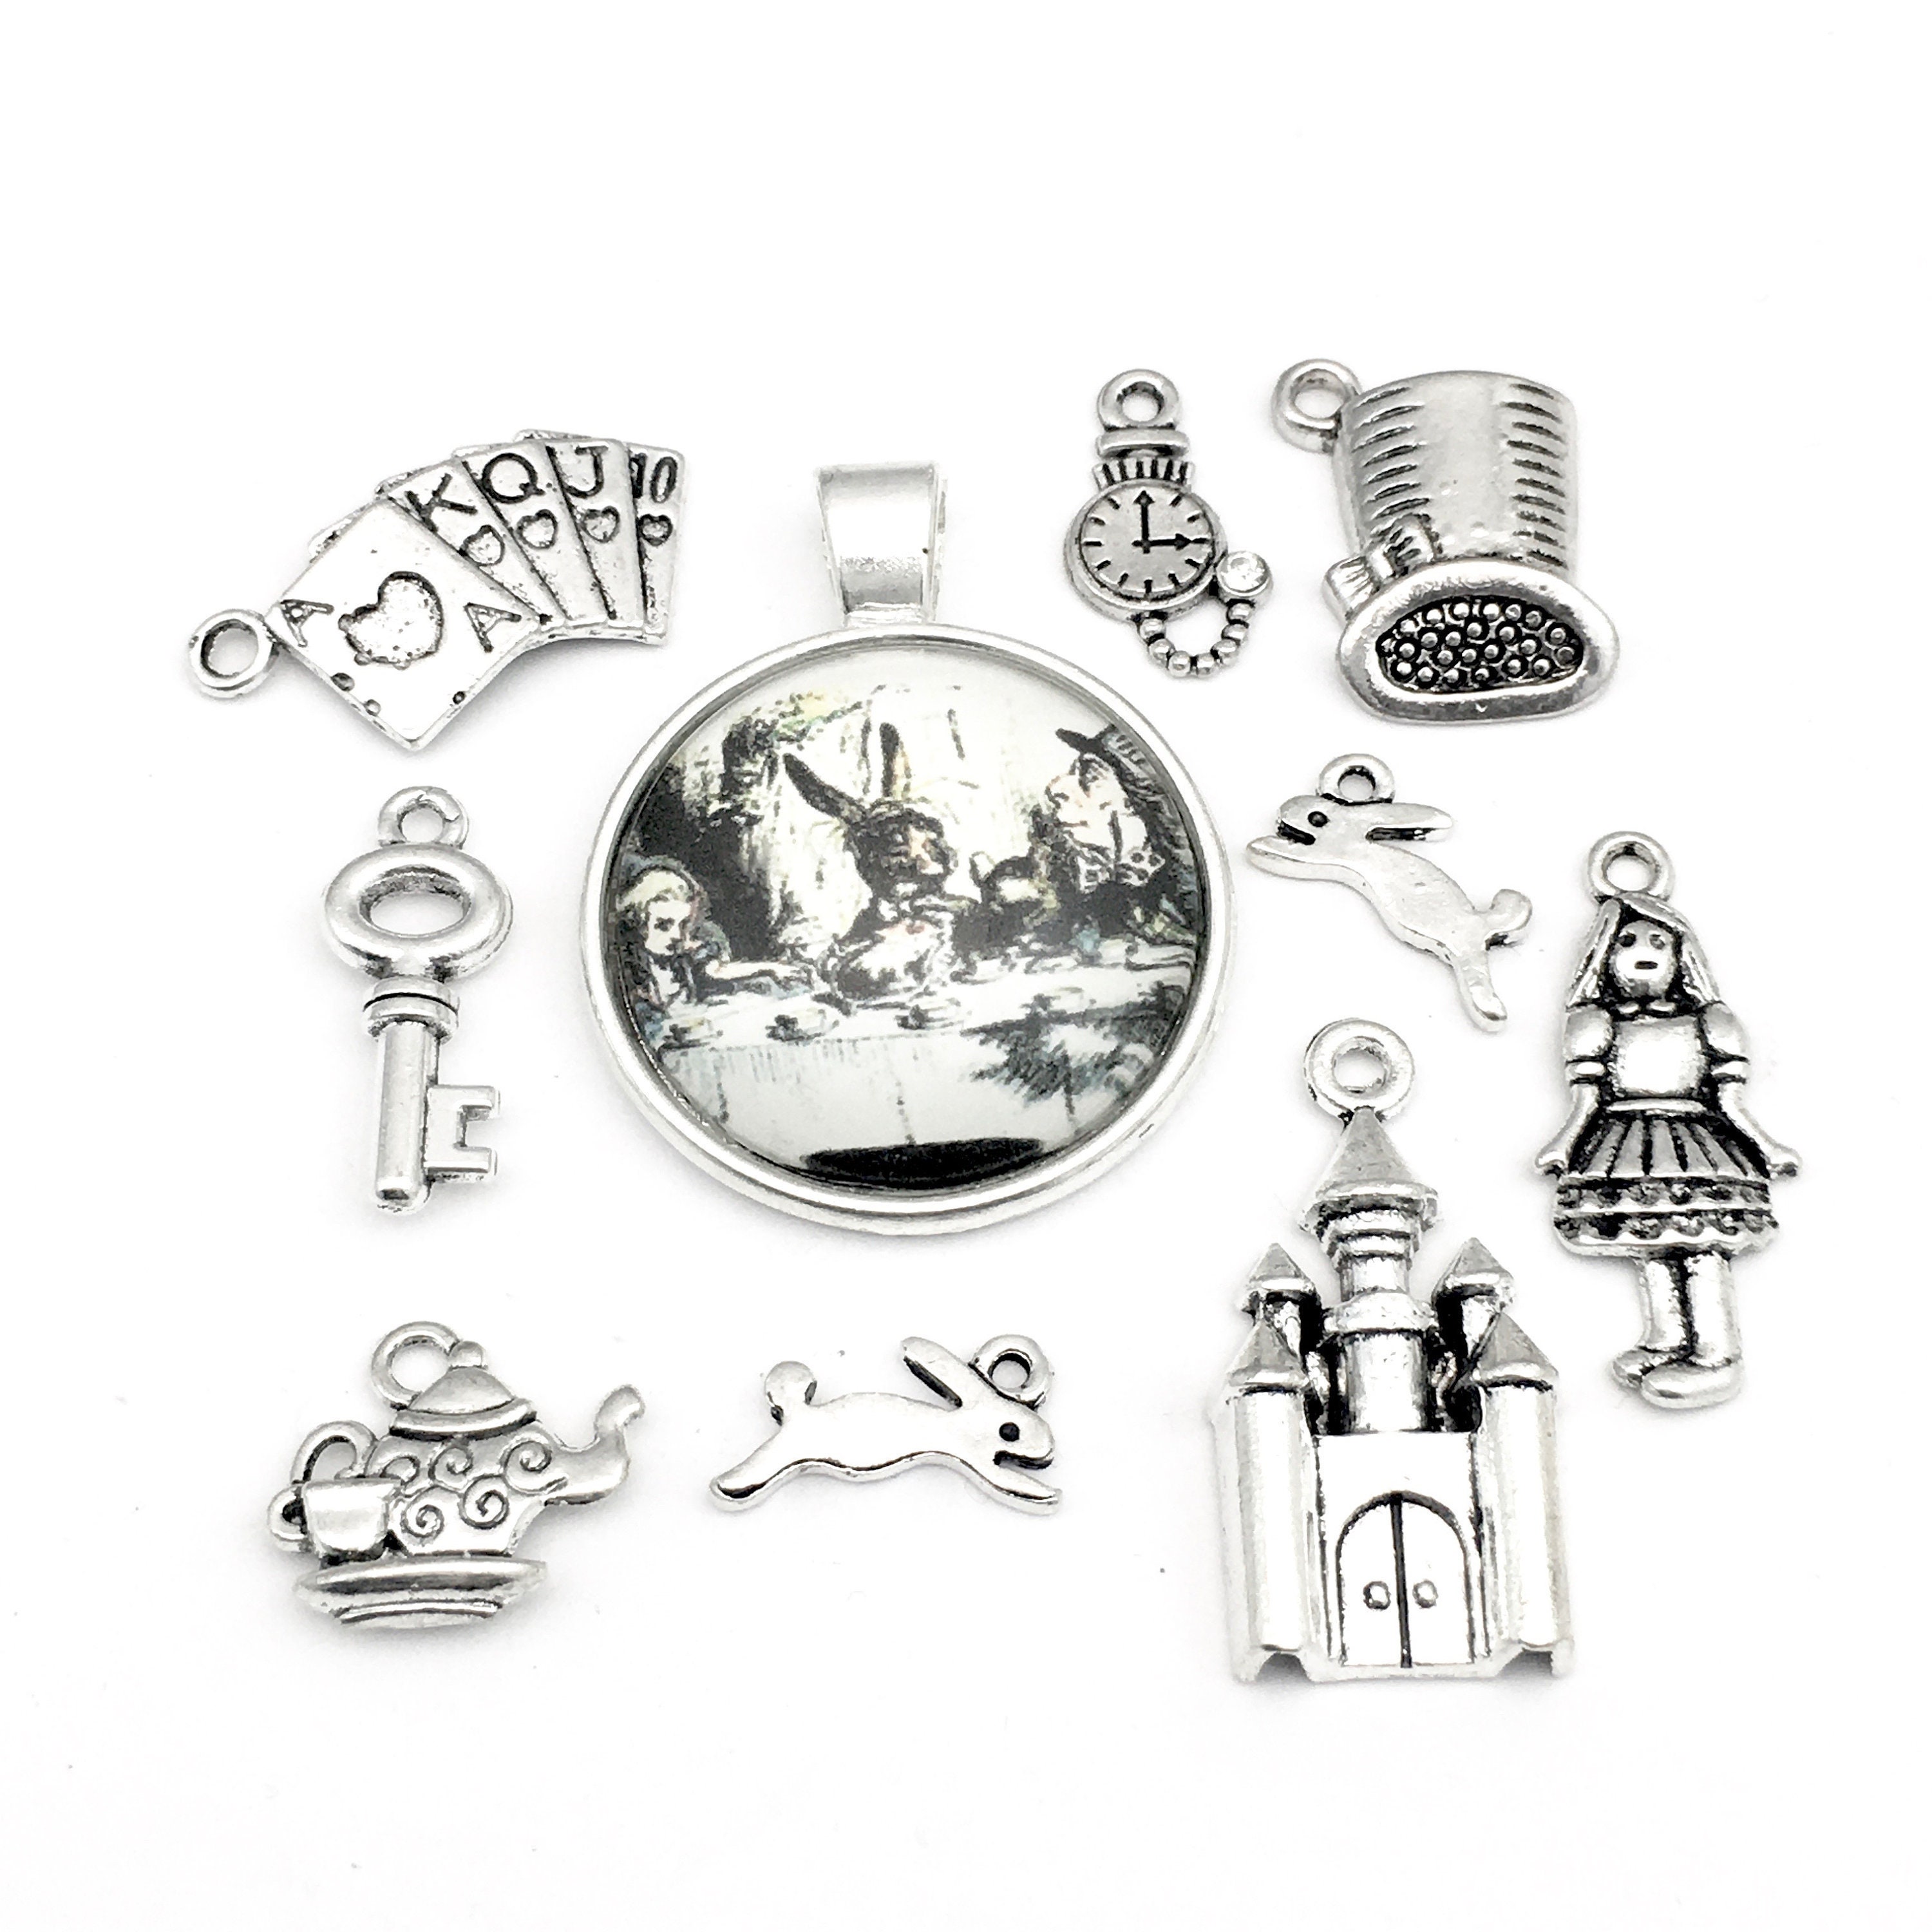 10 Alice in Wonderland Charms Collection Silver Tone Metal,7 Mm to 35 Mm  ENS A 220 